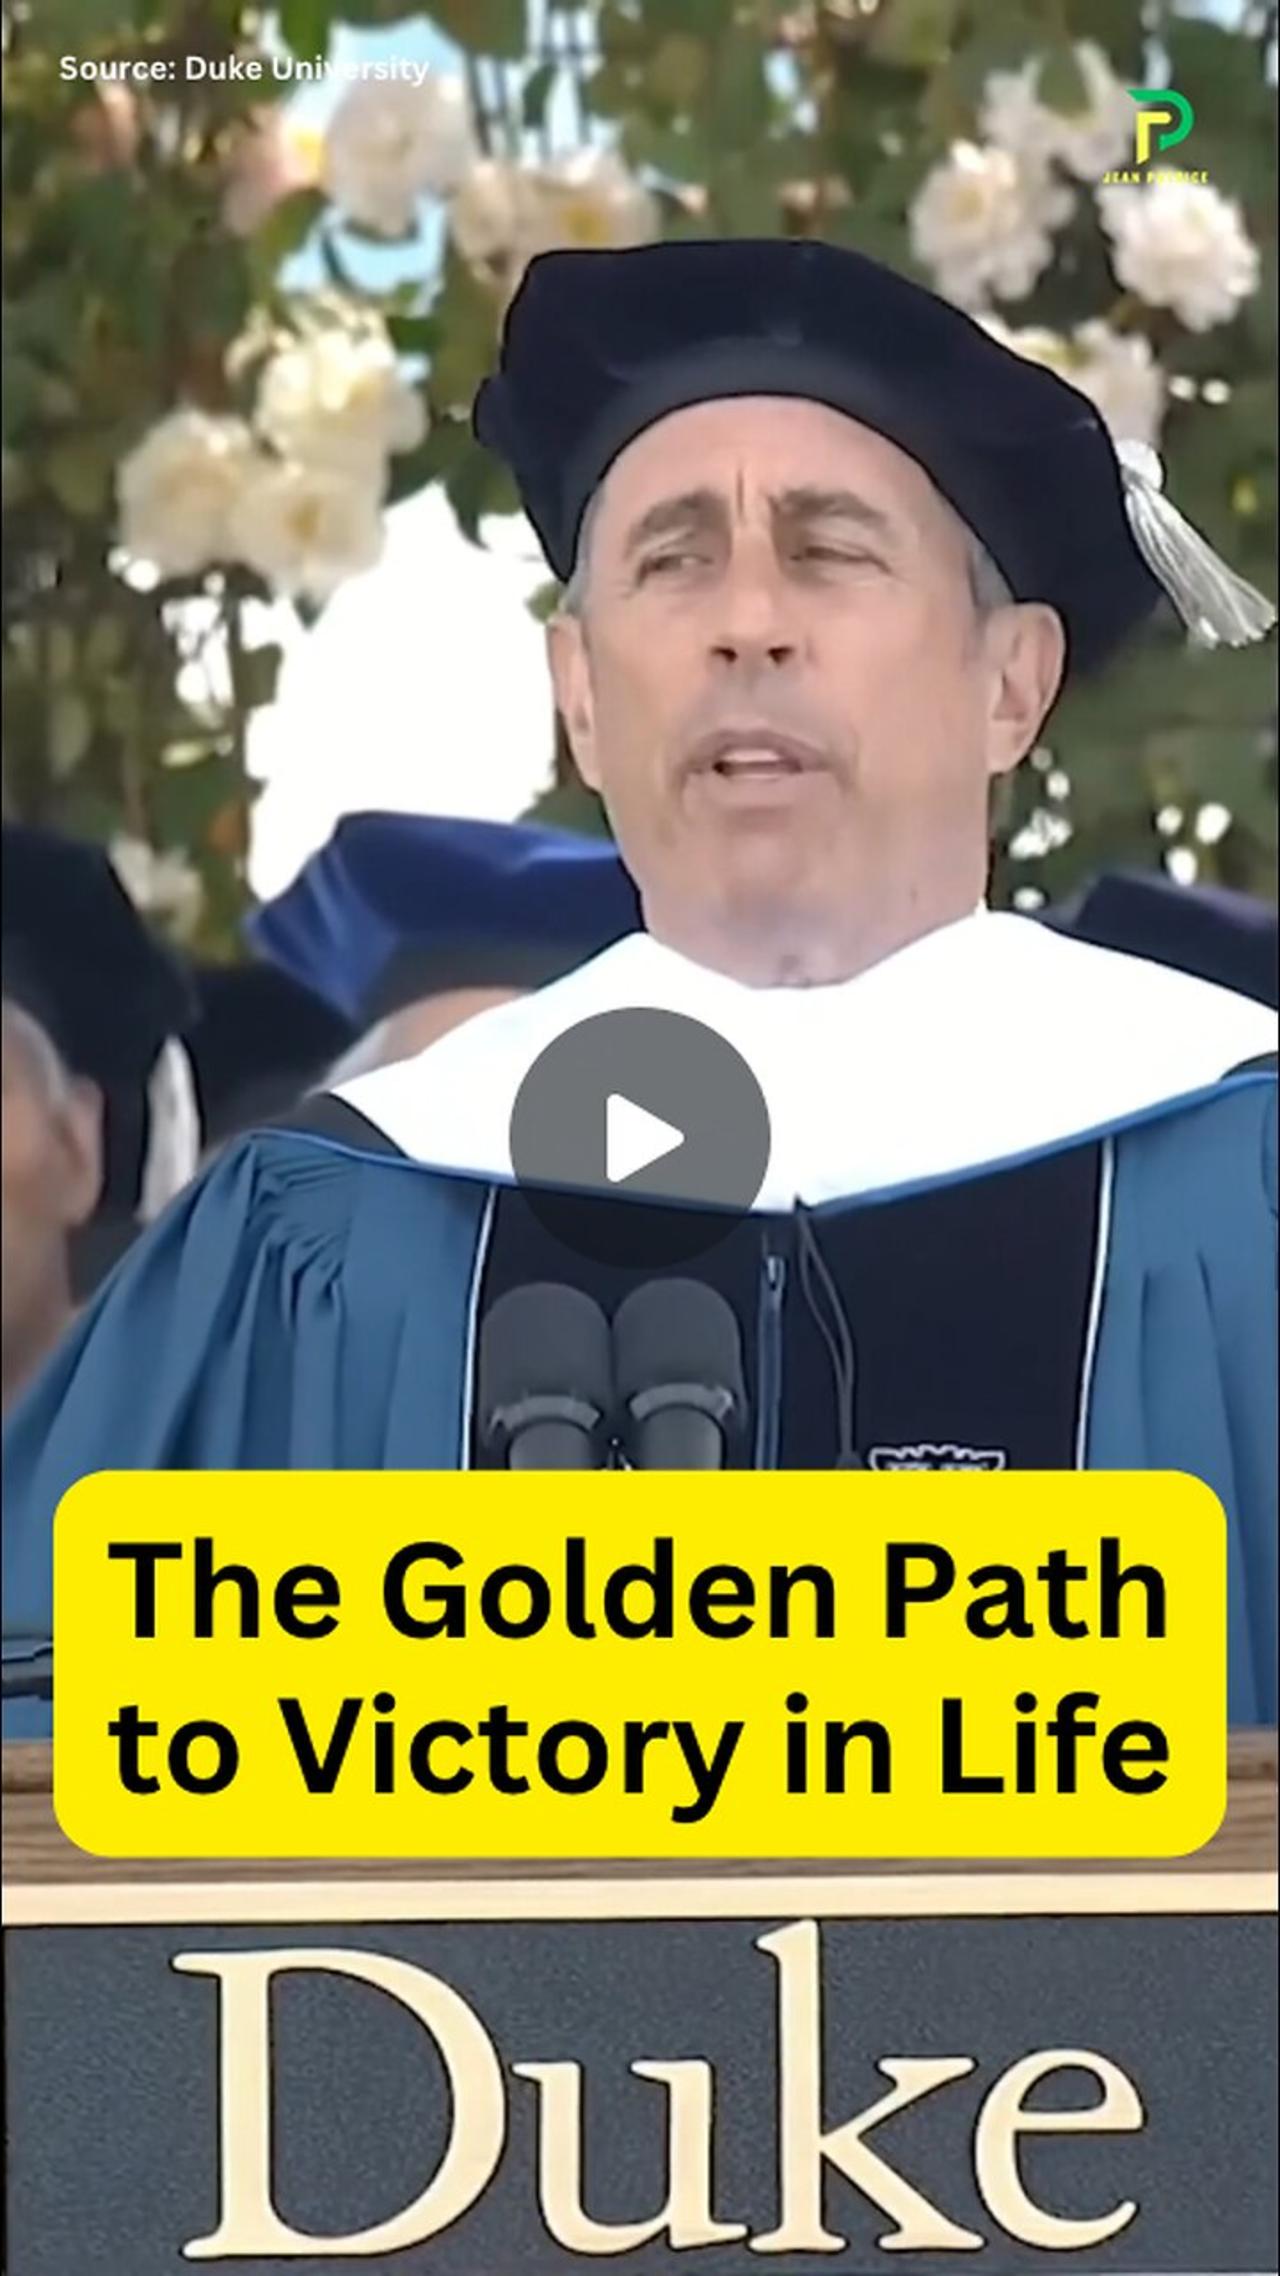 The Golden Path to Victory in Life – Jerry [Video]